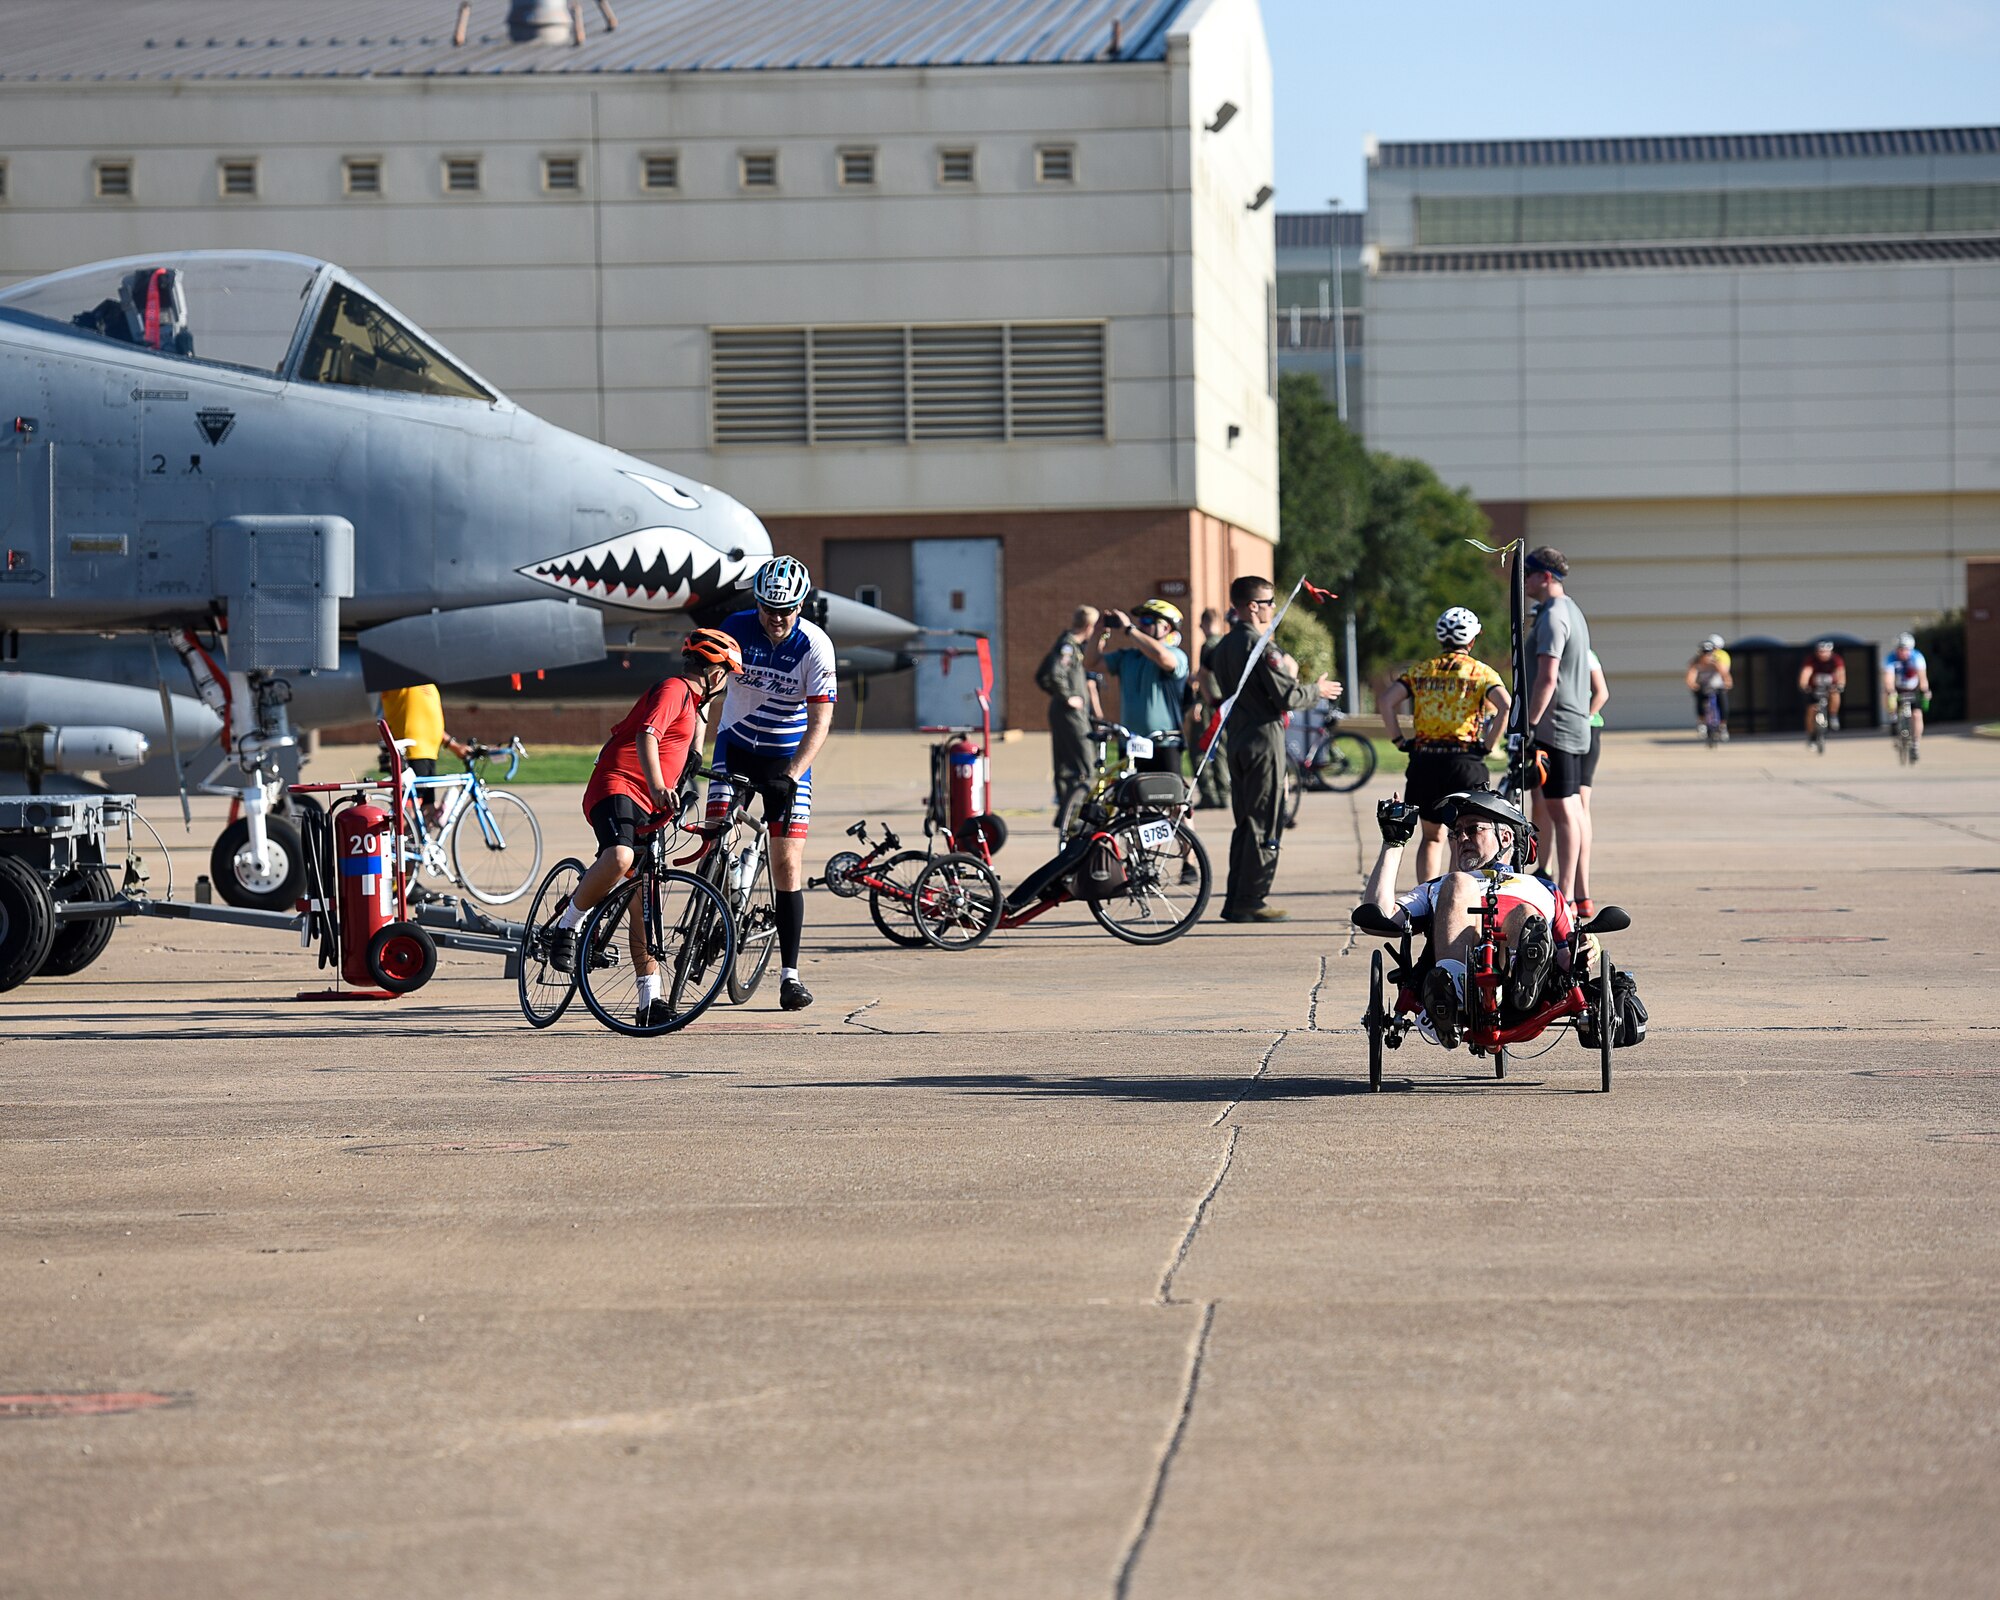 A man on a reclined bike video tapes the aircraft that are set up as part of Airpower Alley.